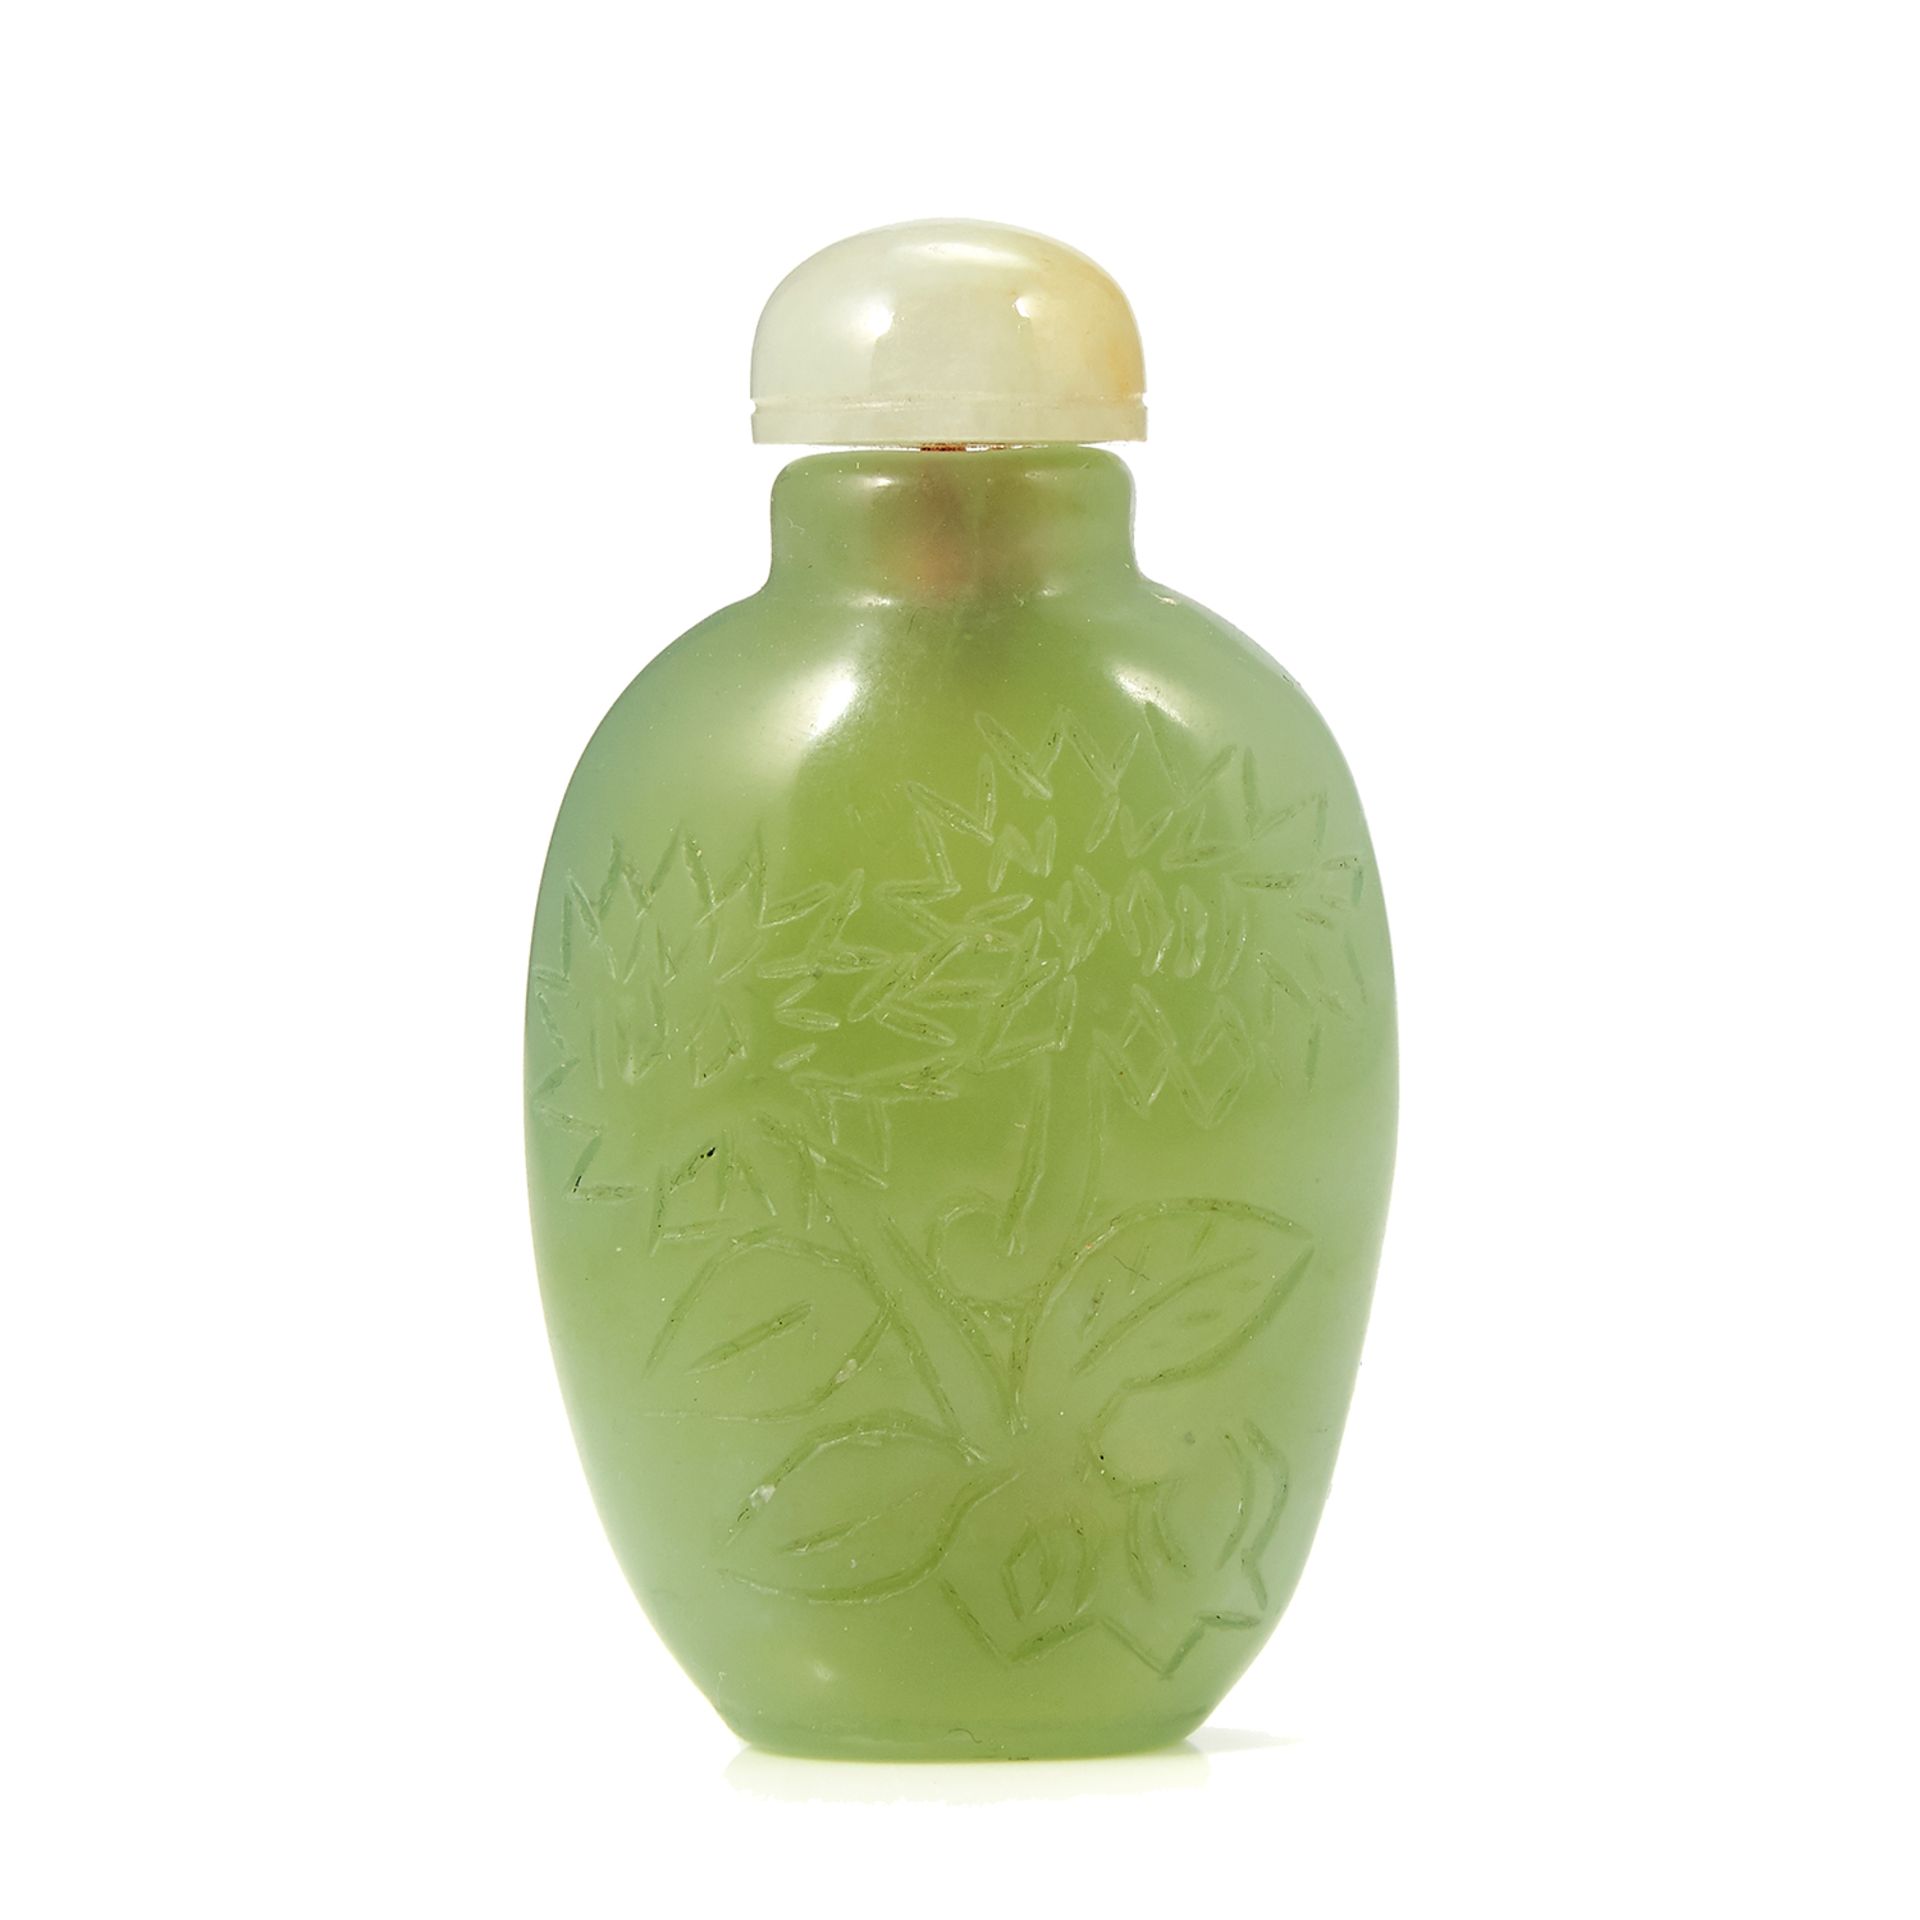 AN ANTIQUE CHINESE JADE SNUFF BOTTLE, 19TH CENTURY carved to one side in shallow relief with